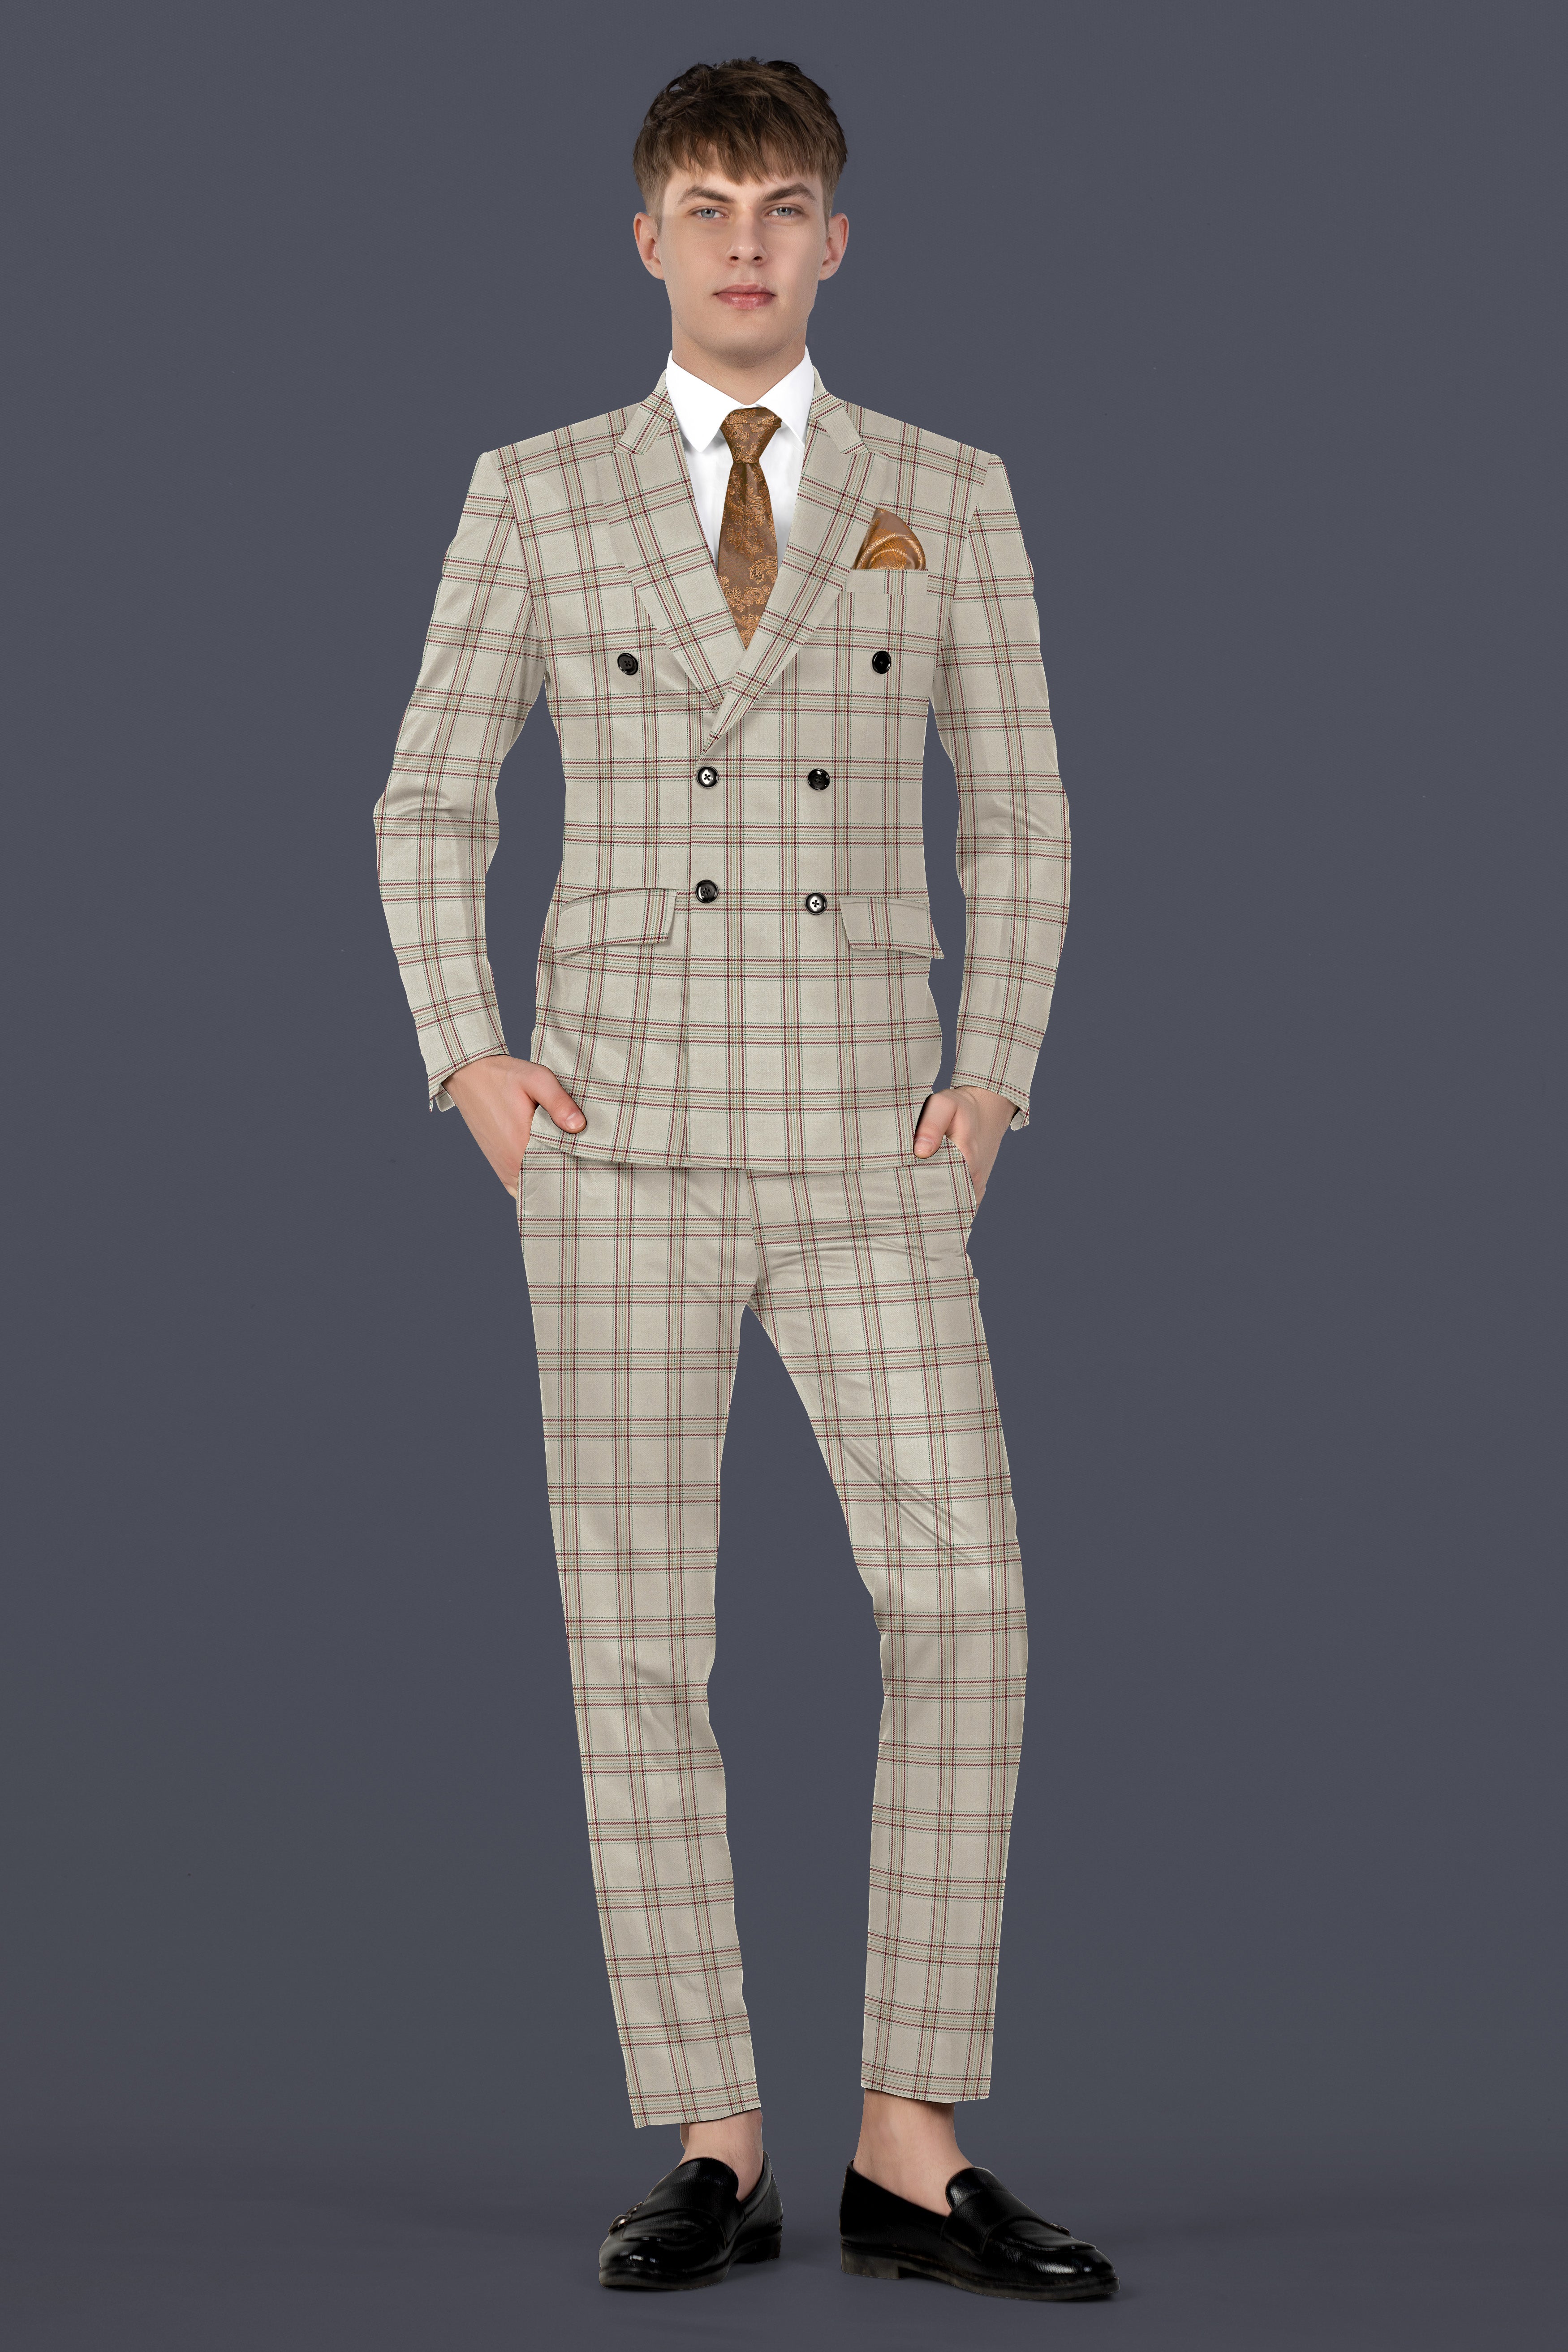 Swirl Cream with Maroon and Green windowpane Tweed Double Breasted Suit